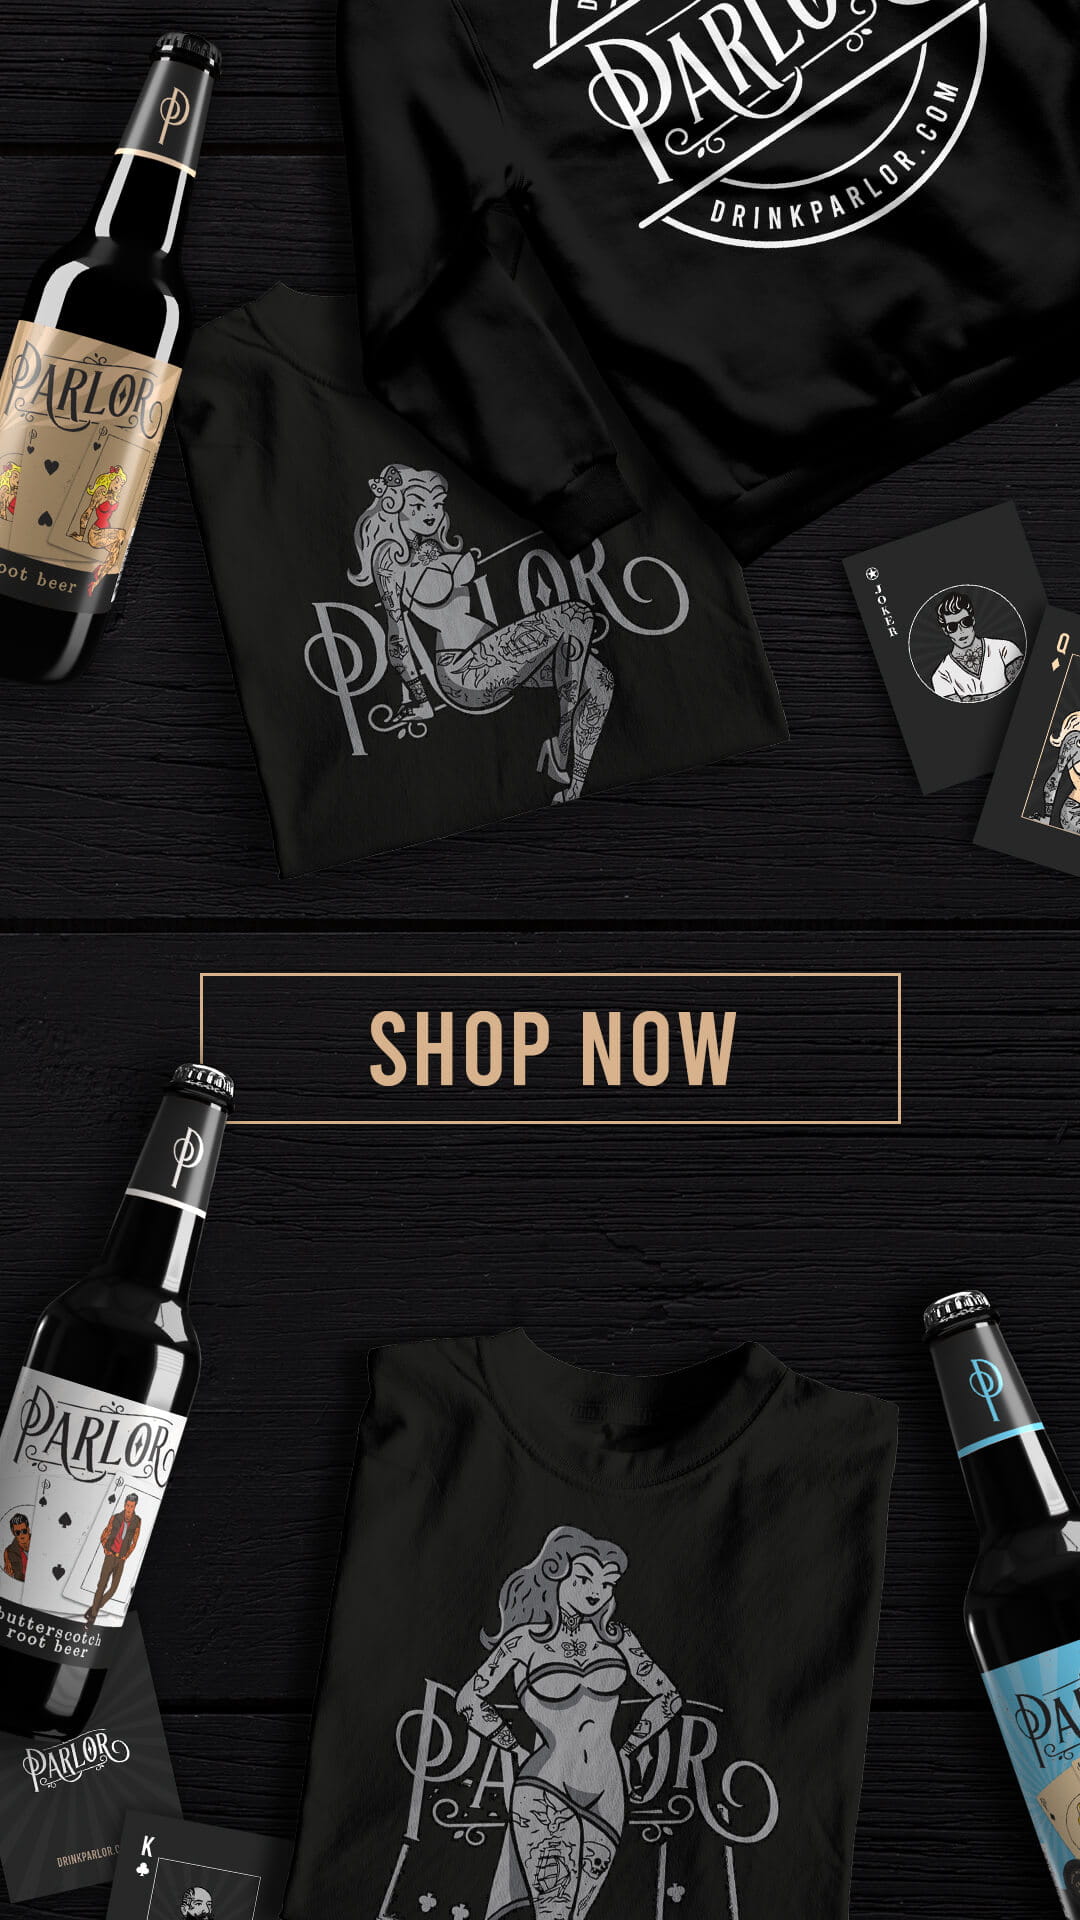 Pre-Order Now: Free deck of Parlor Playing Cards for the first 200 pre-orders